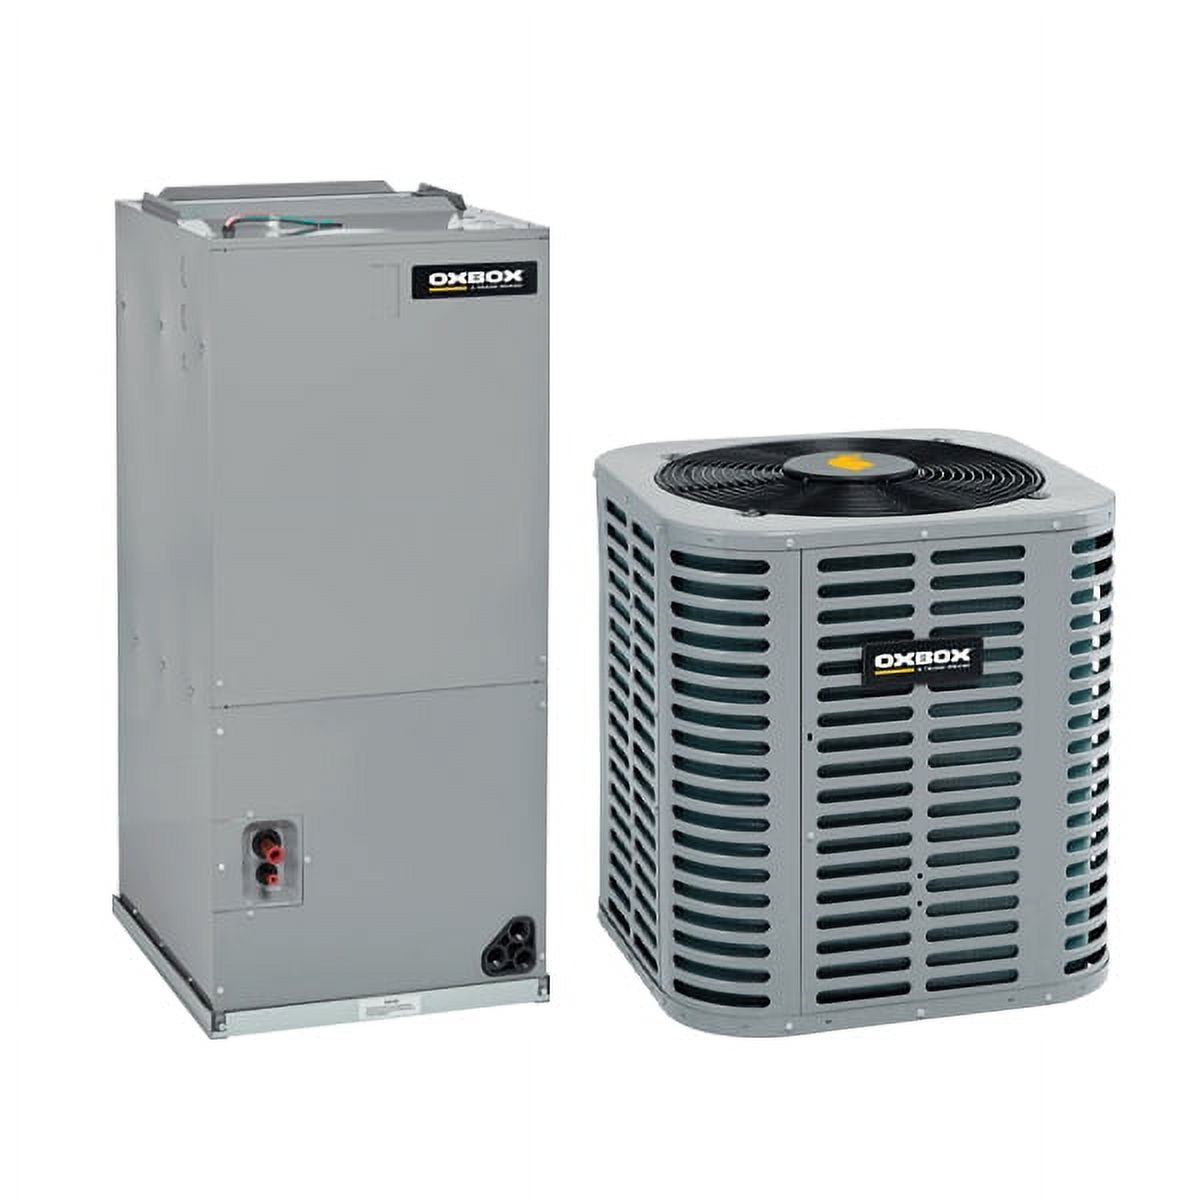 OxBox (A Trane Brand) 5 Ton 15.2 Two-Stage SEER2 Air Conditioning System - J4AC5061E1000A - J4AH5E61E1C00AA - image 1 of 2